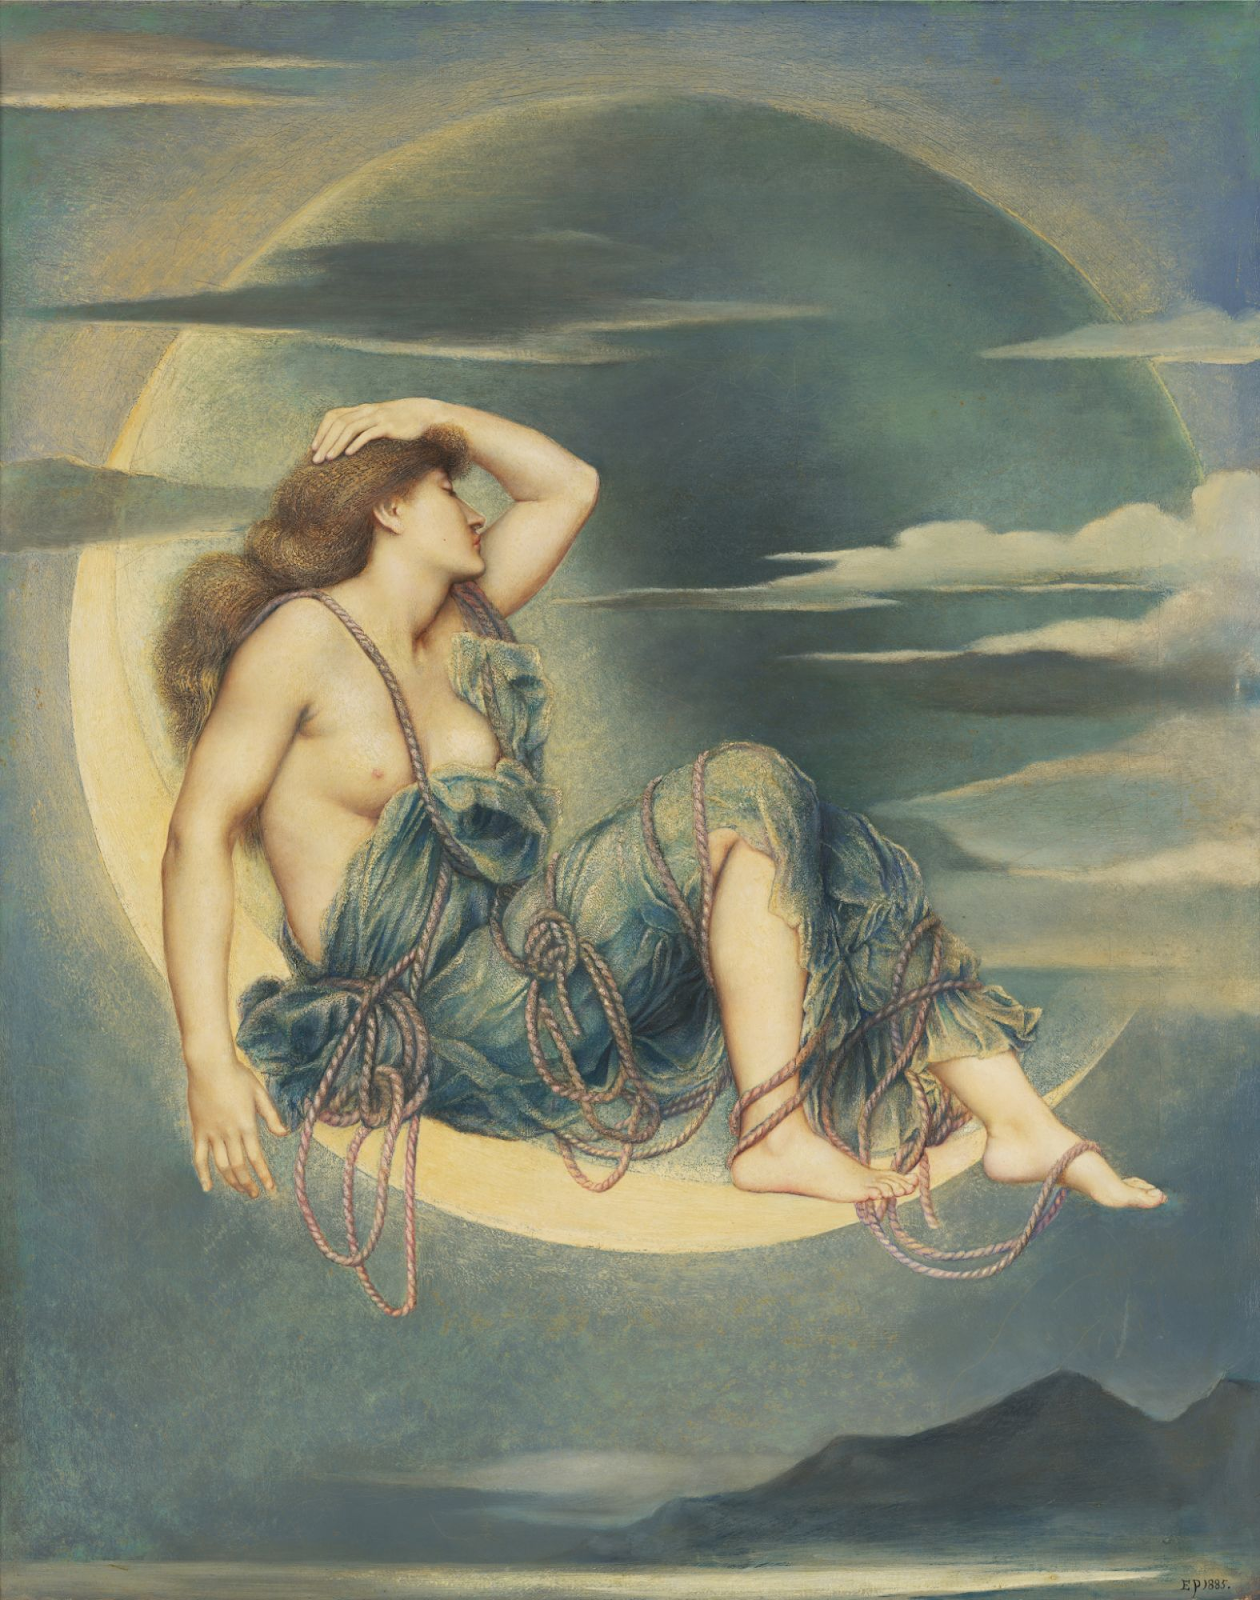 This masterpiece is titled "Luna" and was created by the talented Evelyn De Morgan. The painting portrays the moon as the goddess Luna with flowing blond hair, gracefully adorned in blue robes, resting within the moon's crescent.